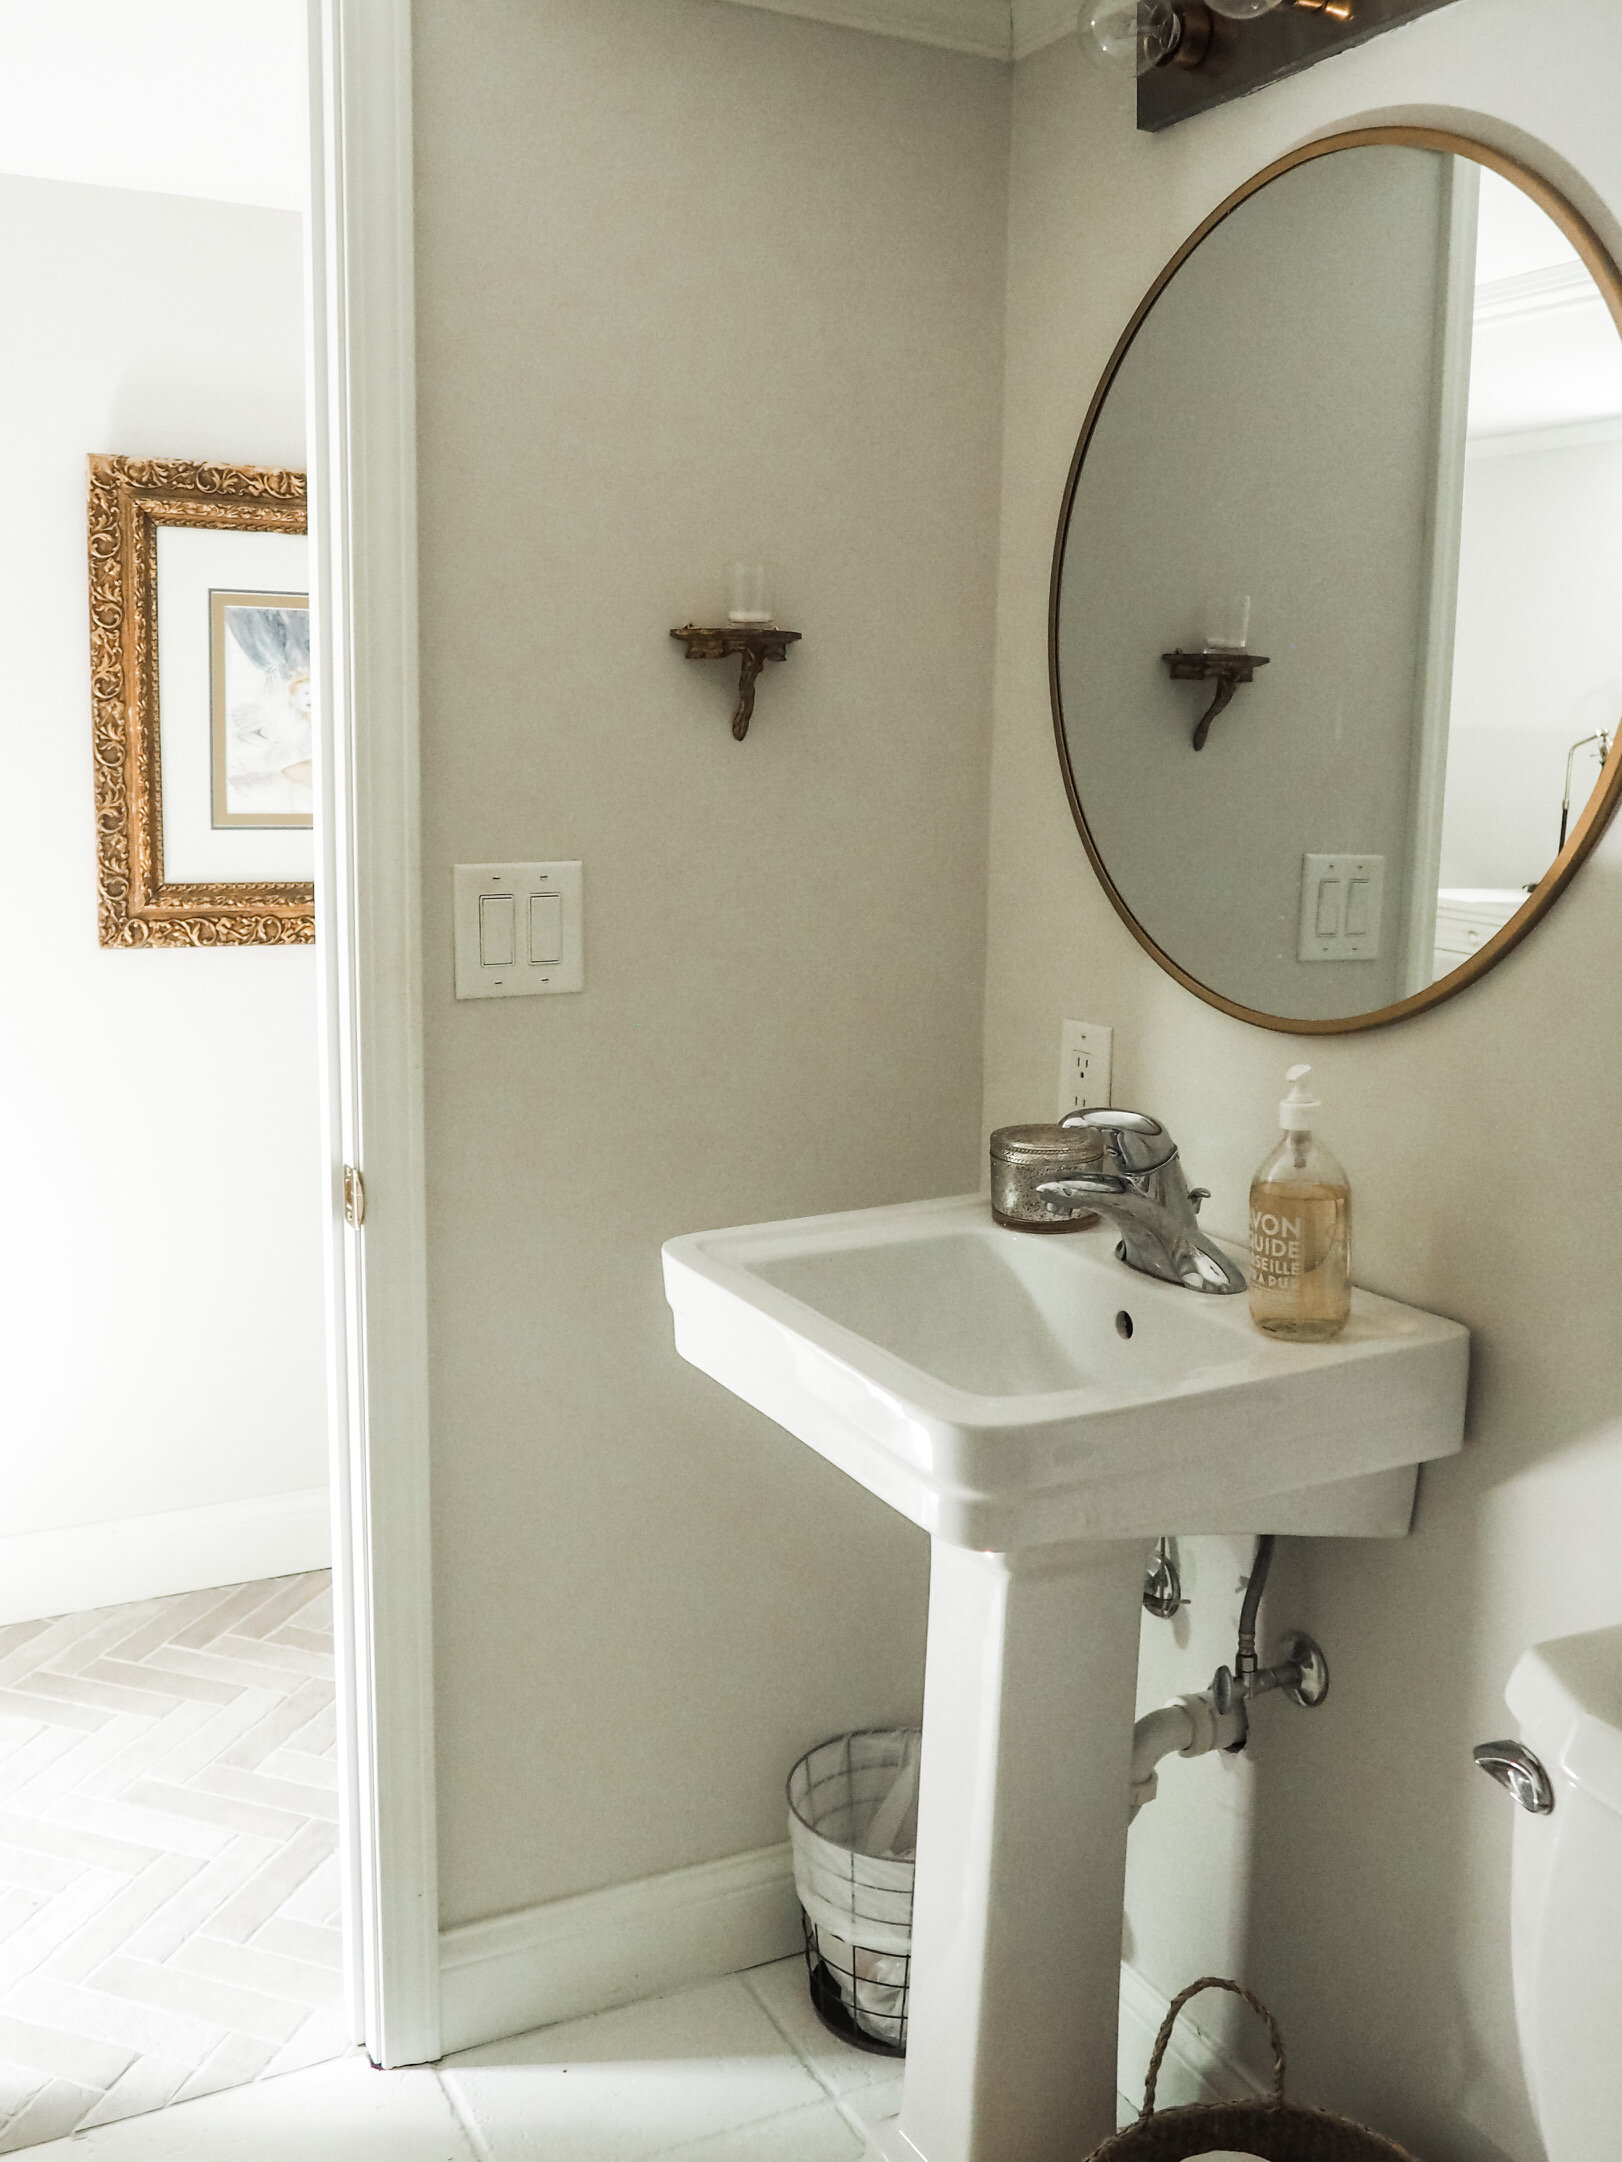 Simple white porcelain pedestal sink and a minimum of accessories